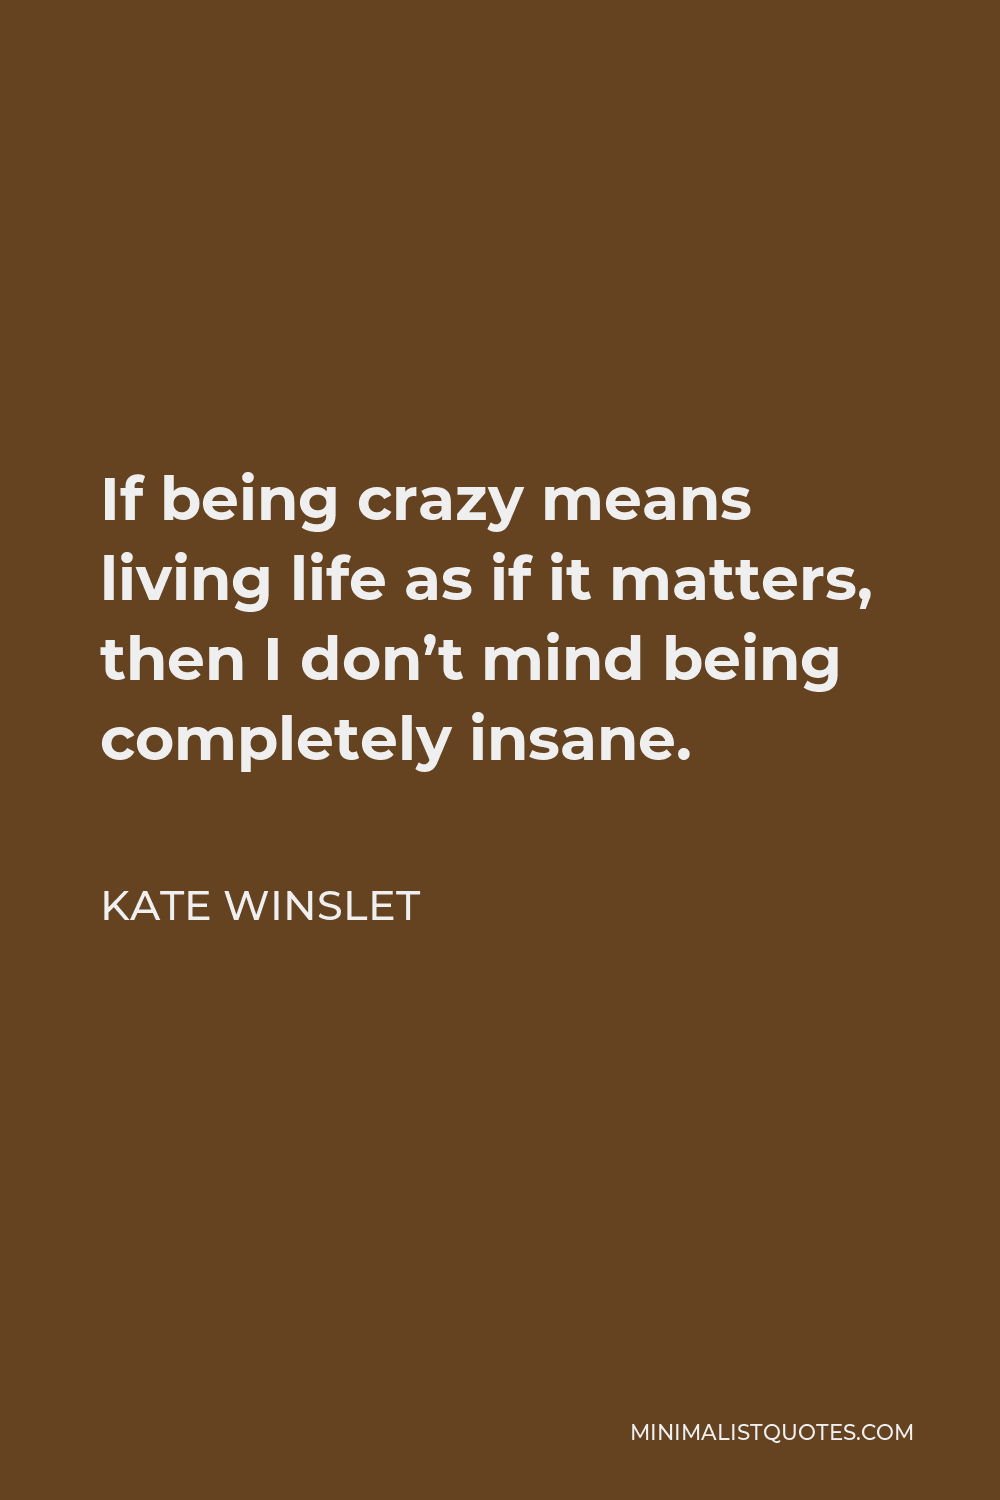 Kate Winslet Quote - If being crazy means living life as if it matters, then I don’t mind being completely insane.